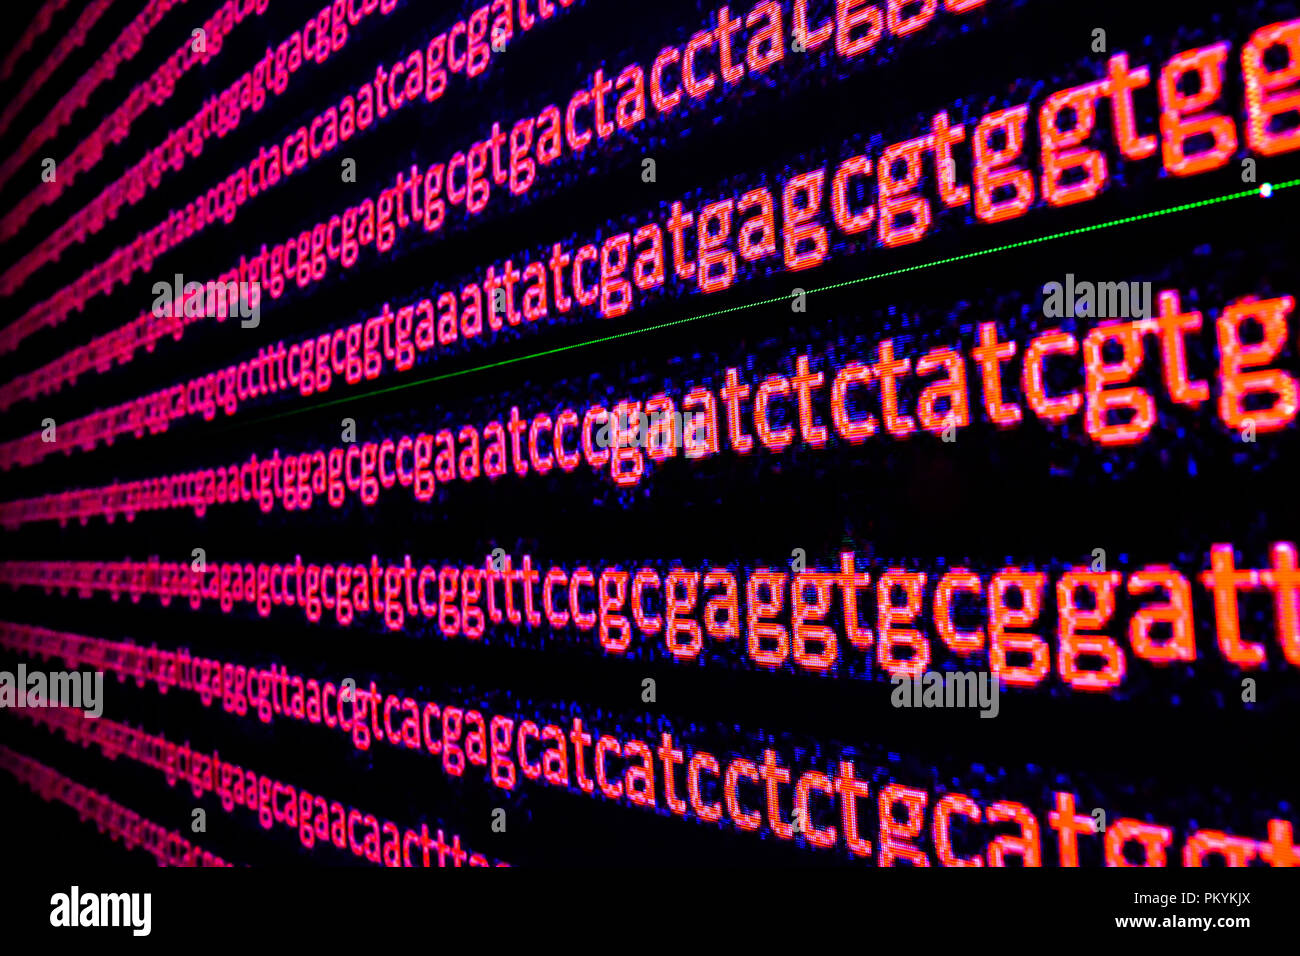 Genomic sequencing. The sequence of nucleotide bases in DNA. Stock Photo